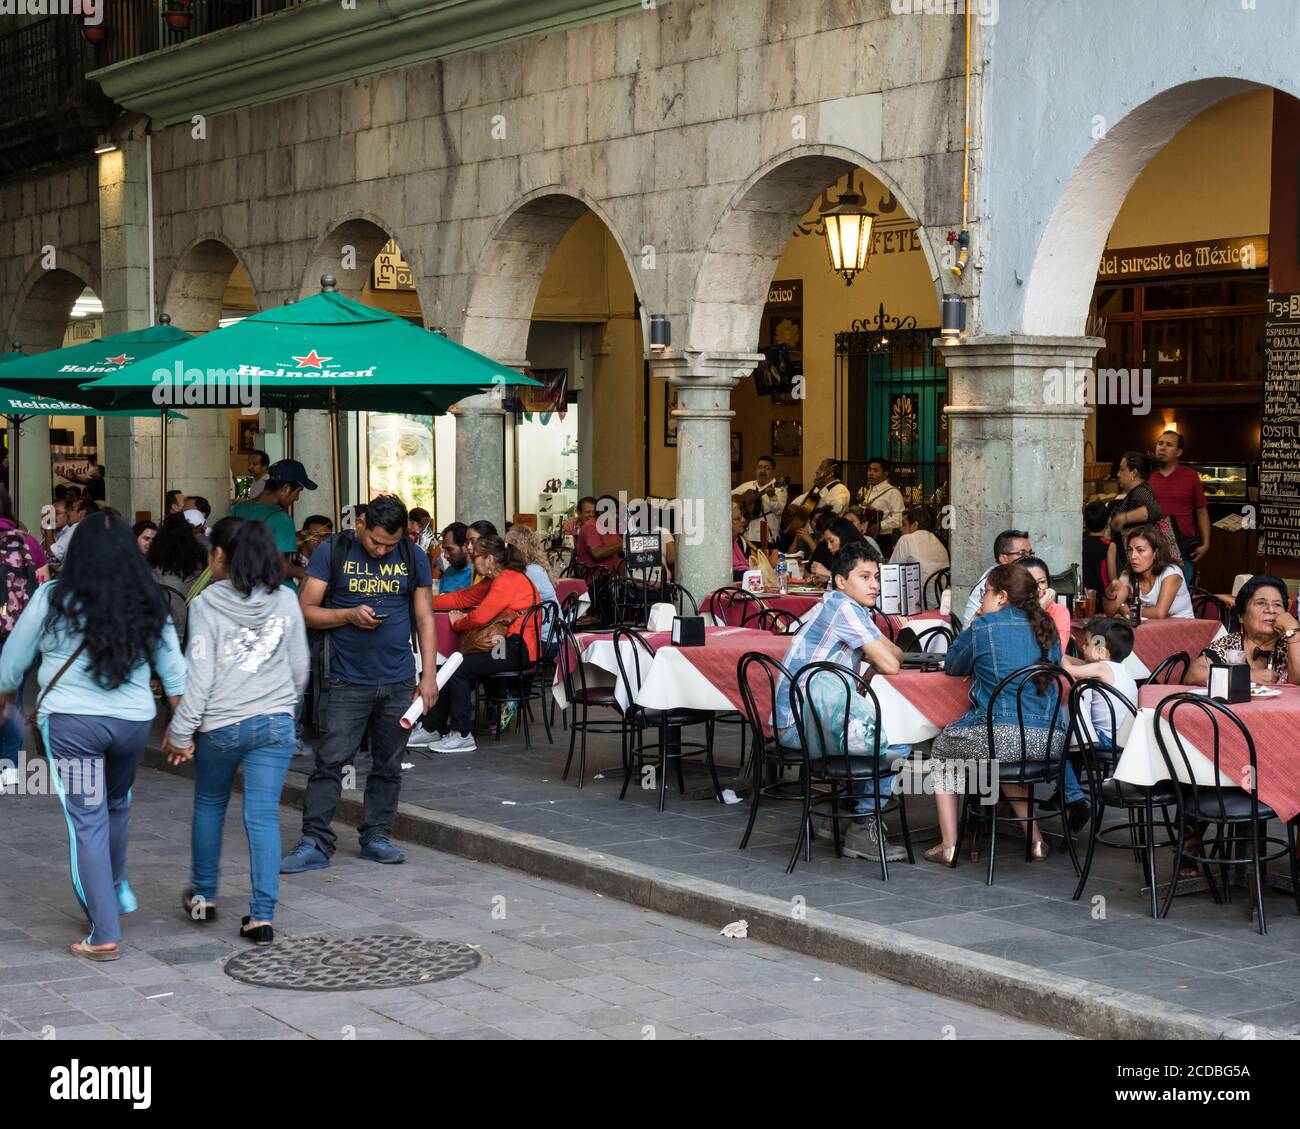 Tourists dining in restaurants in the old historic buildings surrounding the Zocalo, or main plaza in the historic center of Oaxaca, Mexico. Stock Photo